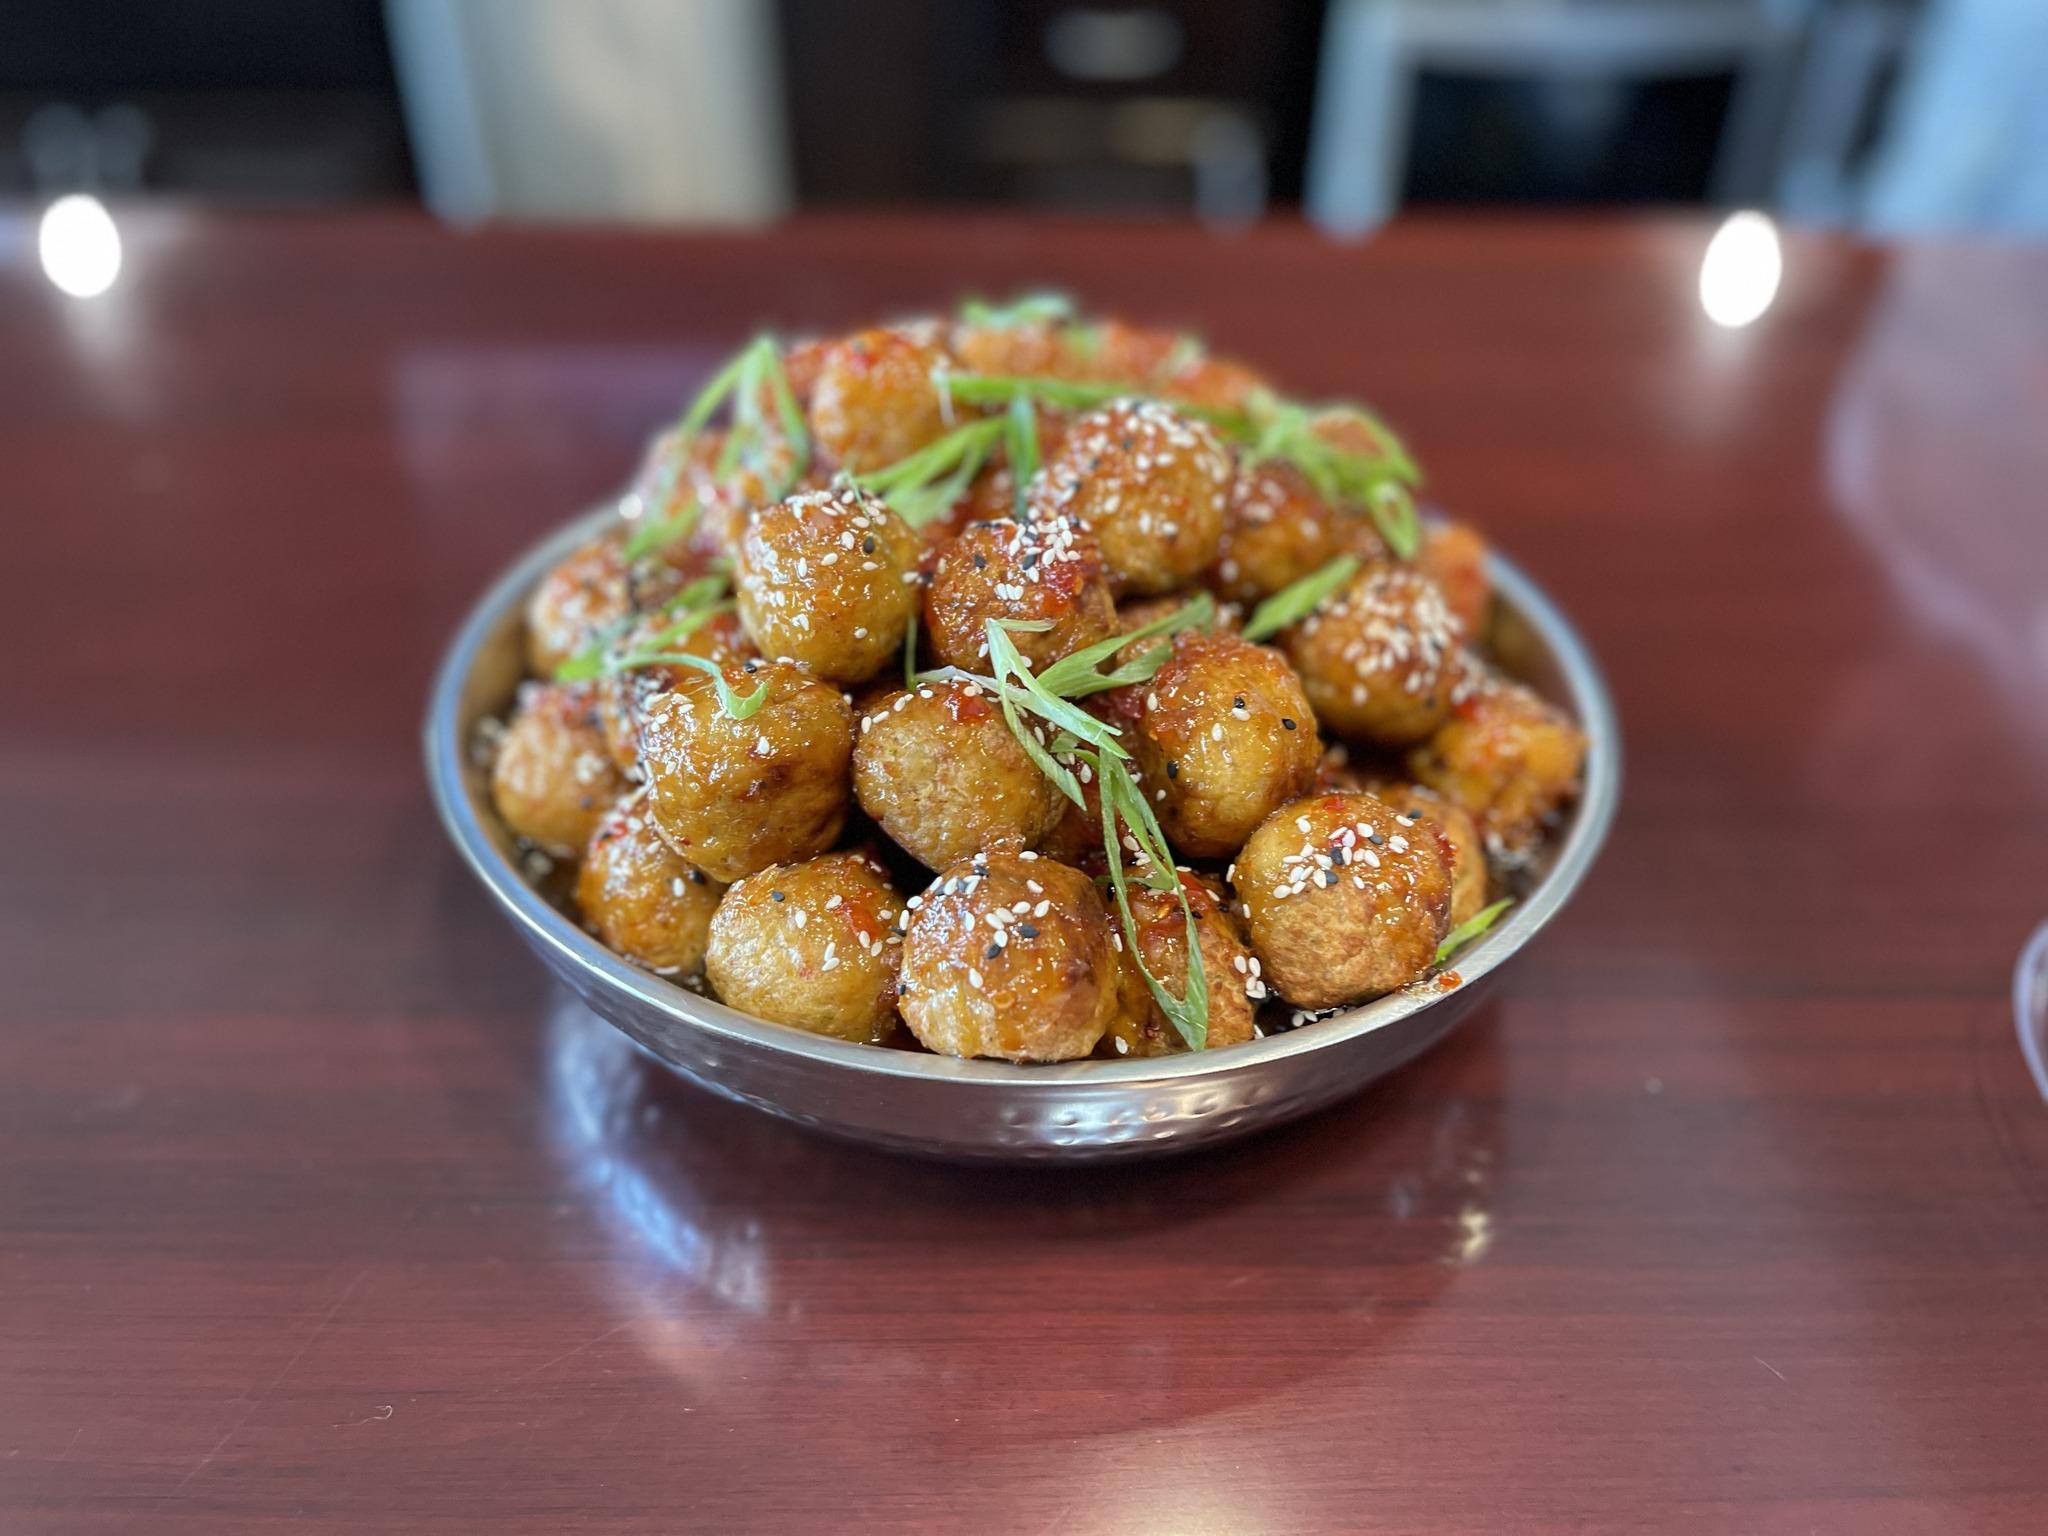 Bowl of glazed meatballs sprinkled with sesame seeds and garnished with green herbs on a table.